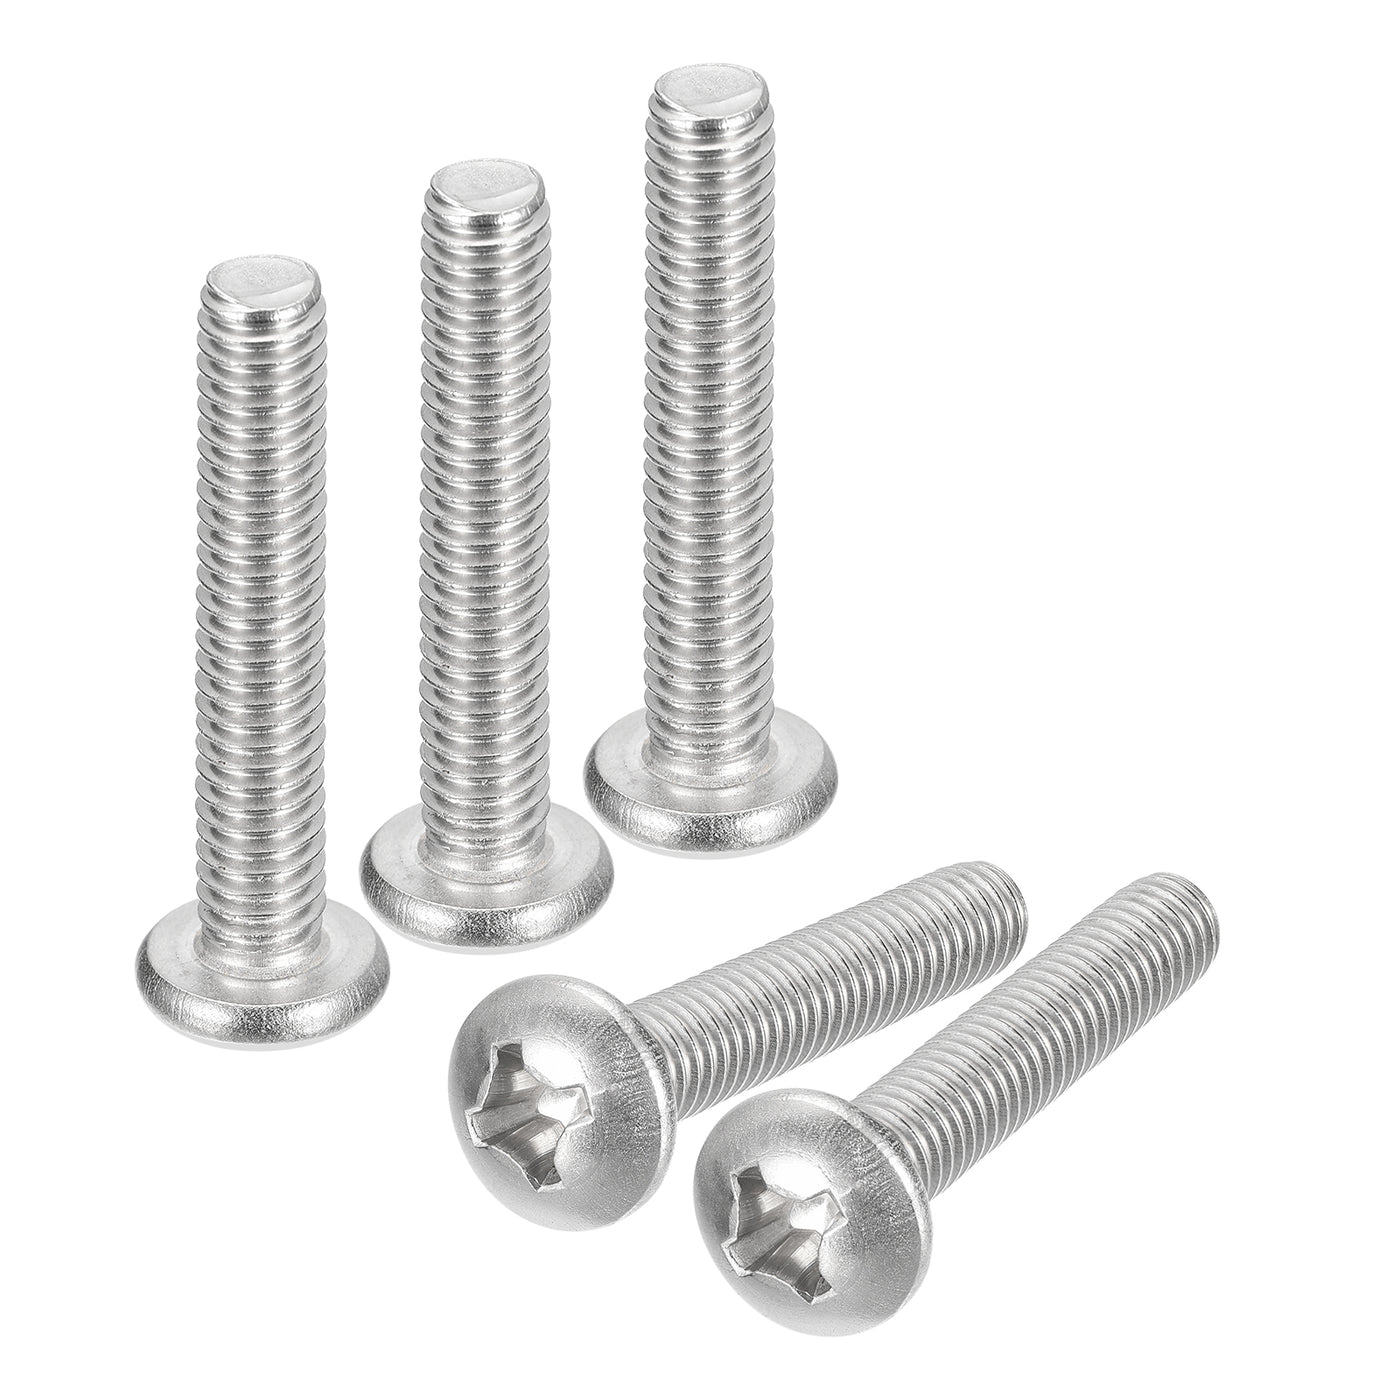 uxcell Uxcell 5/16-18x2" Pan Head Machine Screws, Stainless Steel 18-8 Screw, Pack of 5